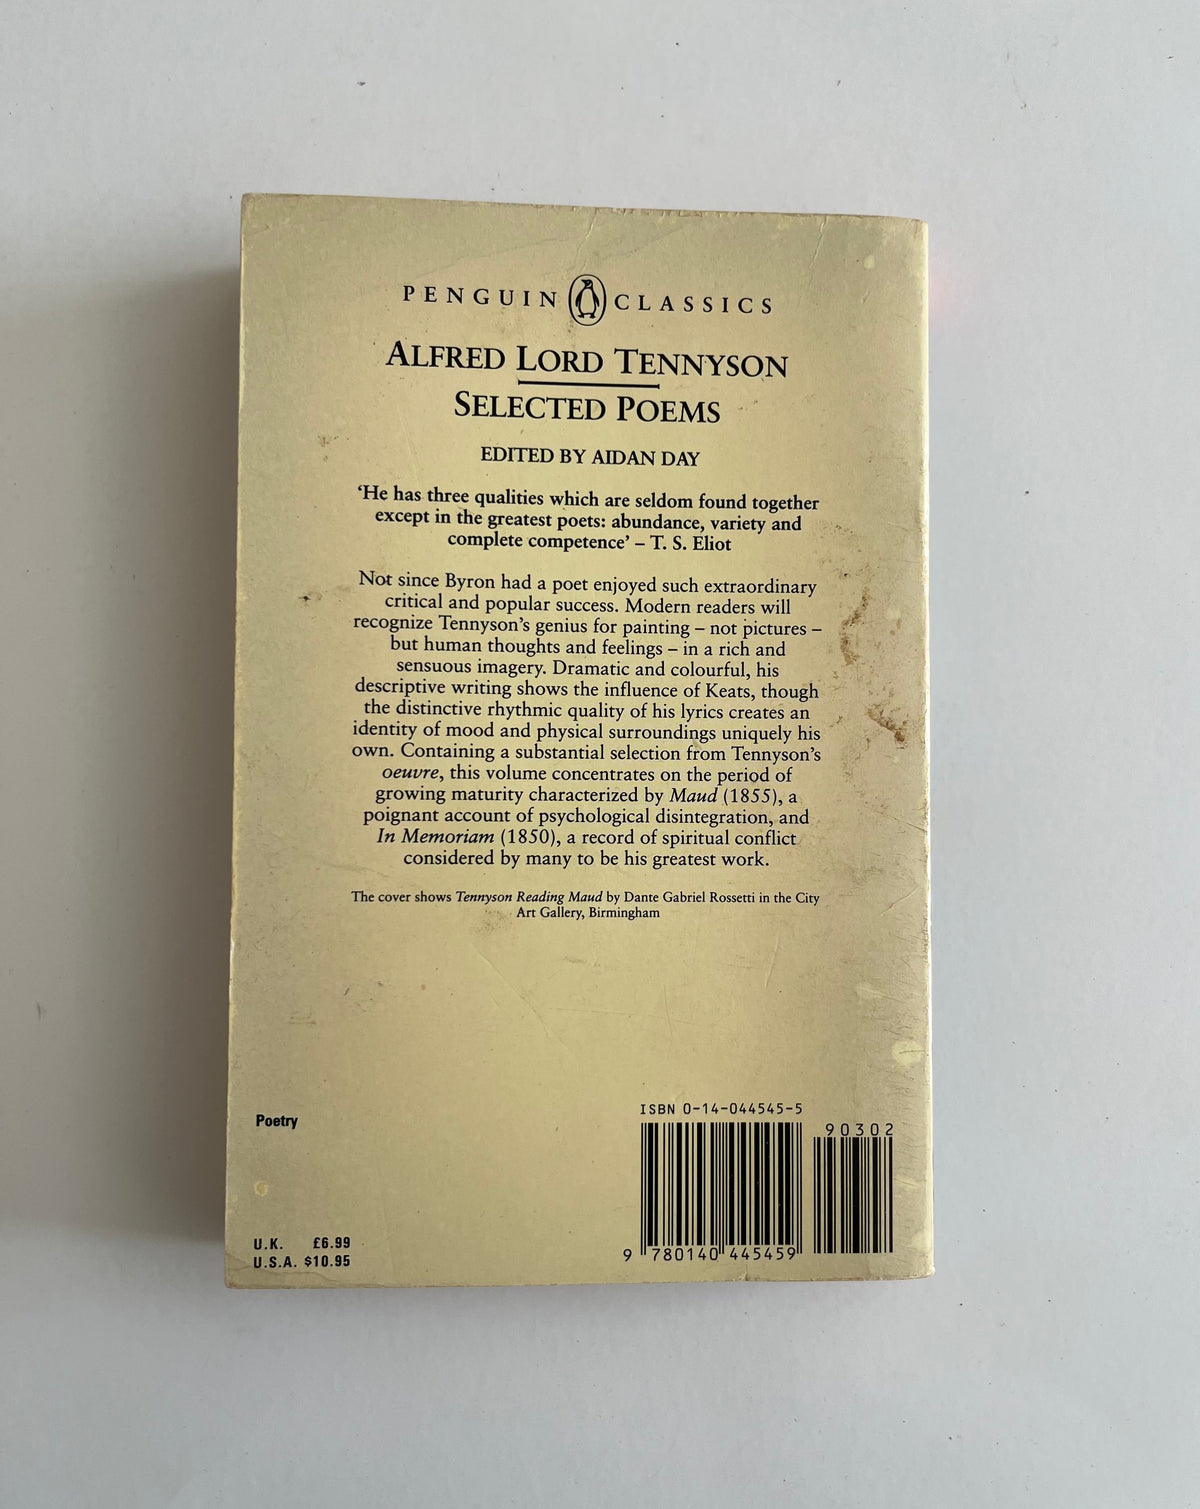 Selected Poems by Alfred Lord Tennyson